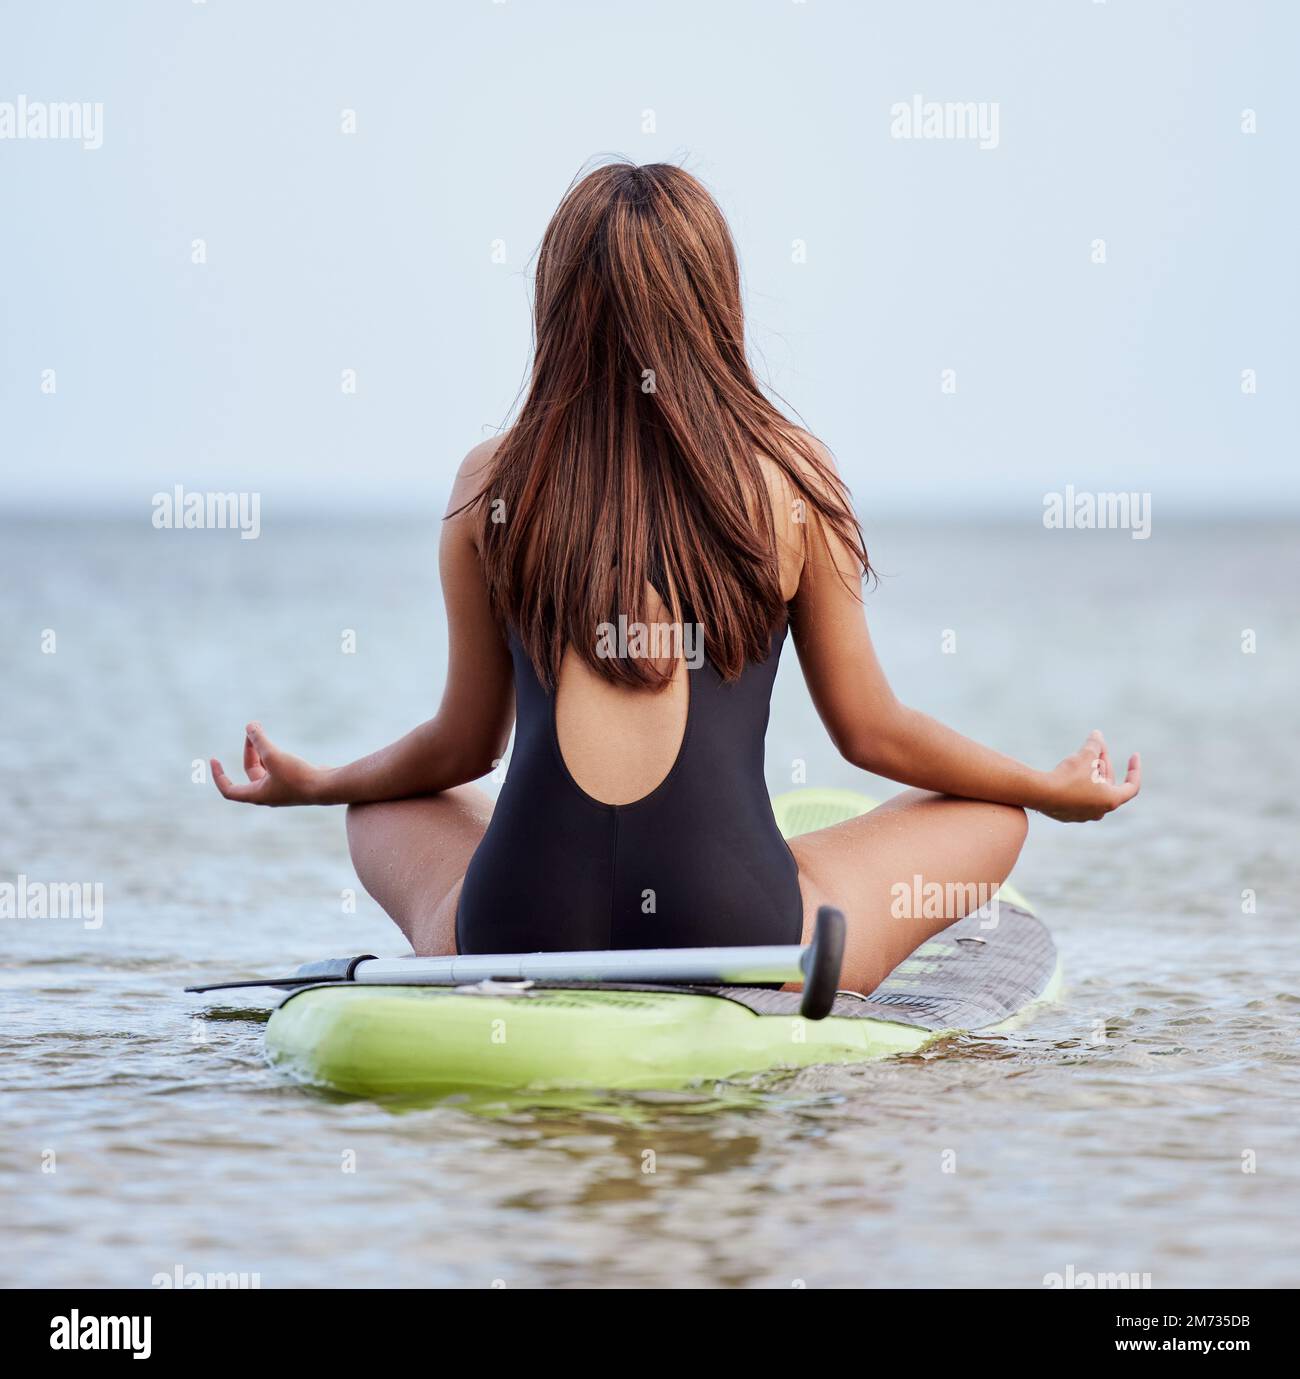 Girl in yoga pose with waves crashing over her legs on beach Stock